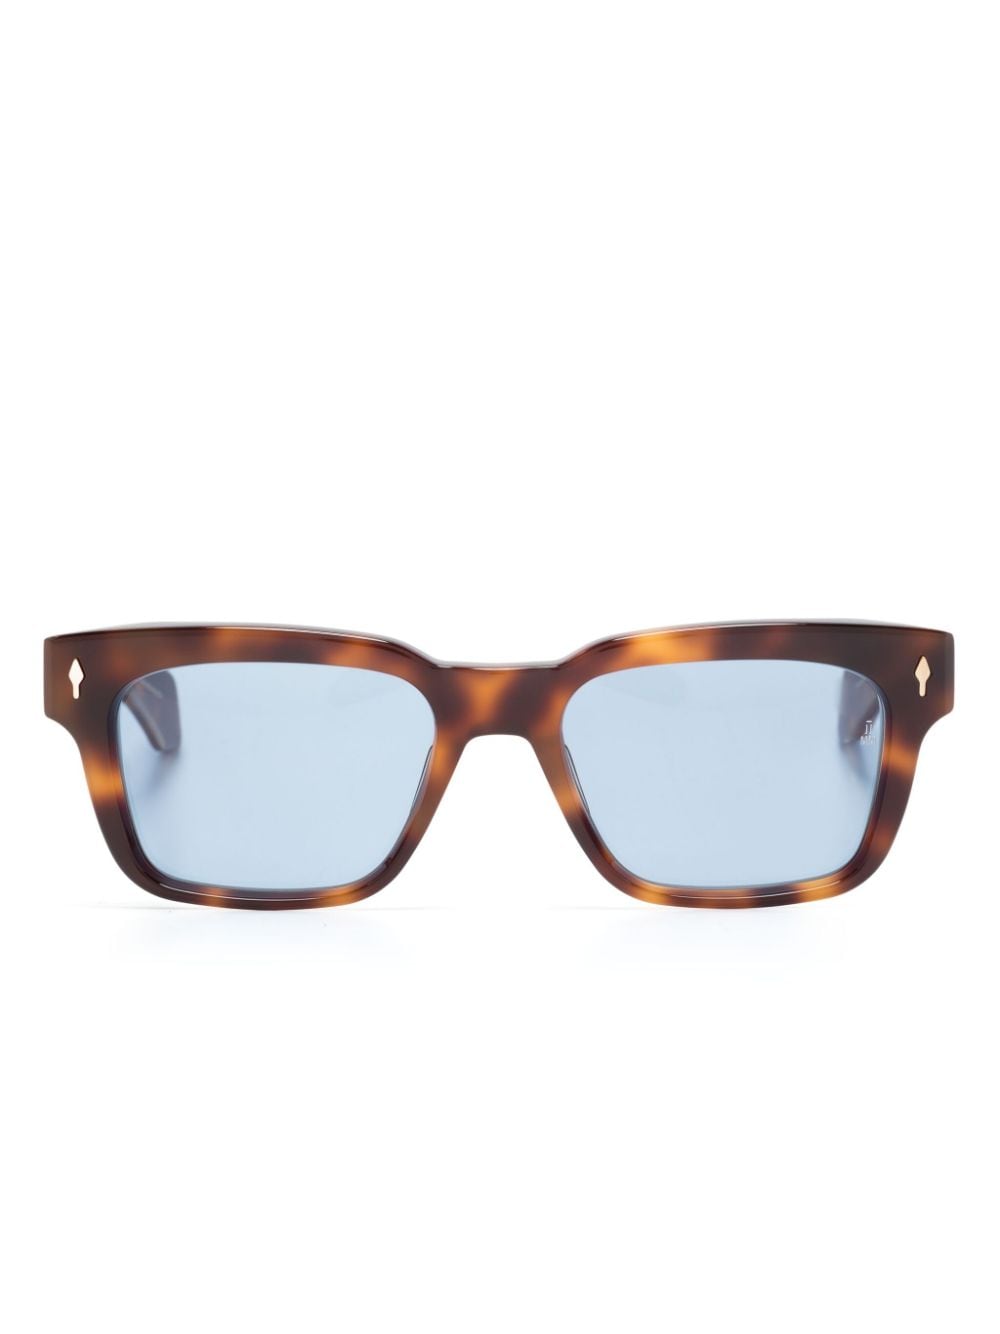 Jacques Marie Mage JACQUES MARIE MAGE- Molino Sunglasses